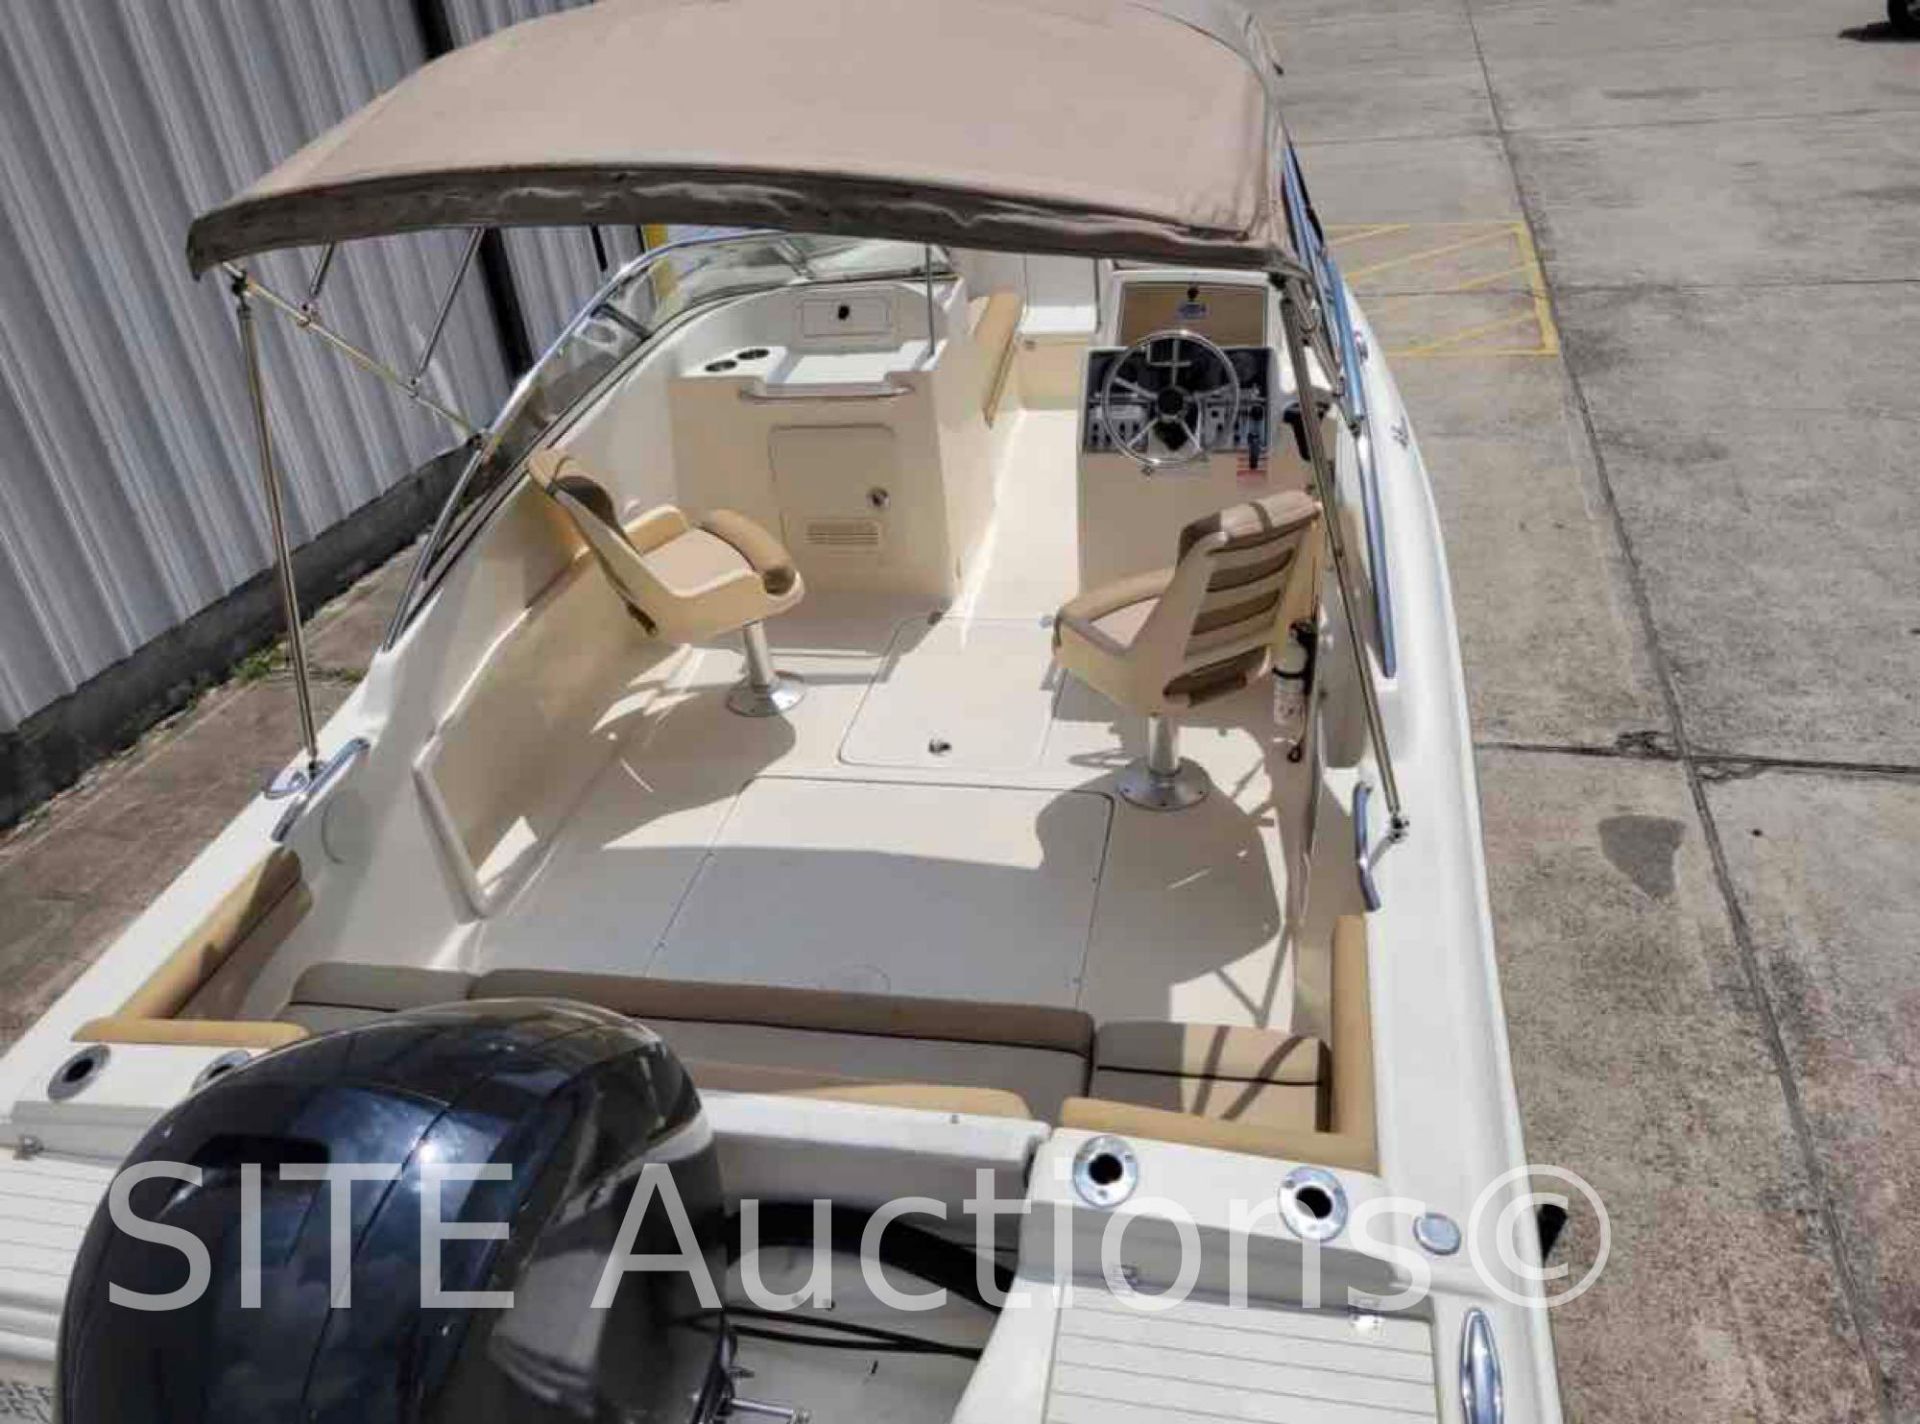 2020 Scout Dorado 20ft. Boat with Trailer - Image 19 of 21